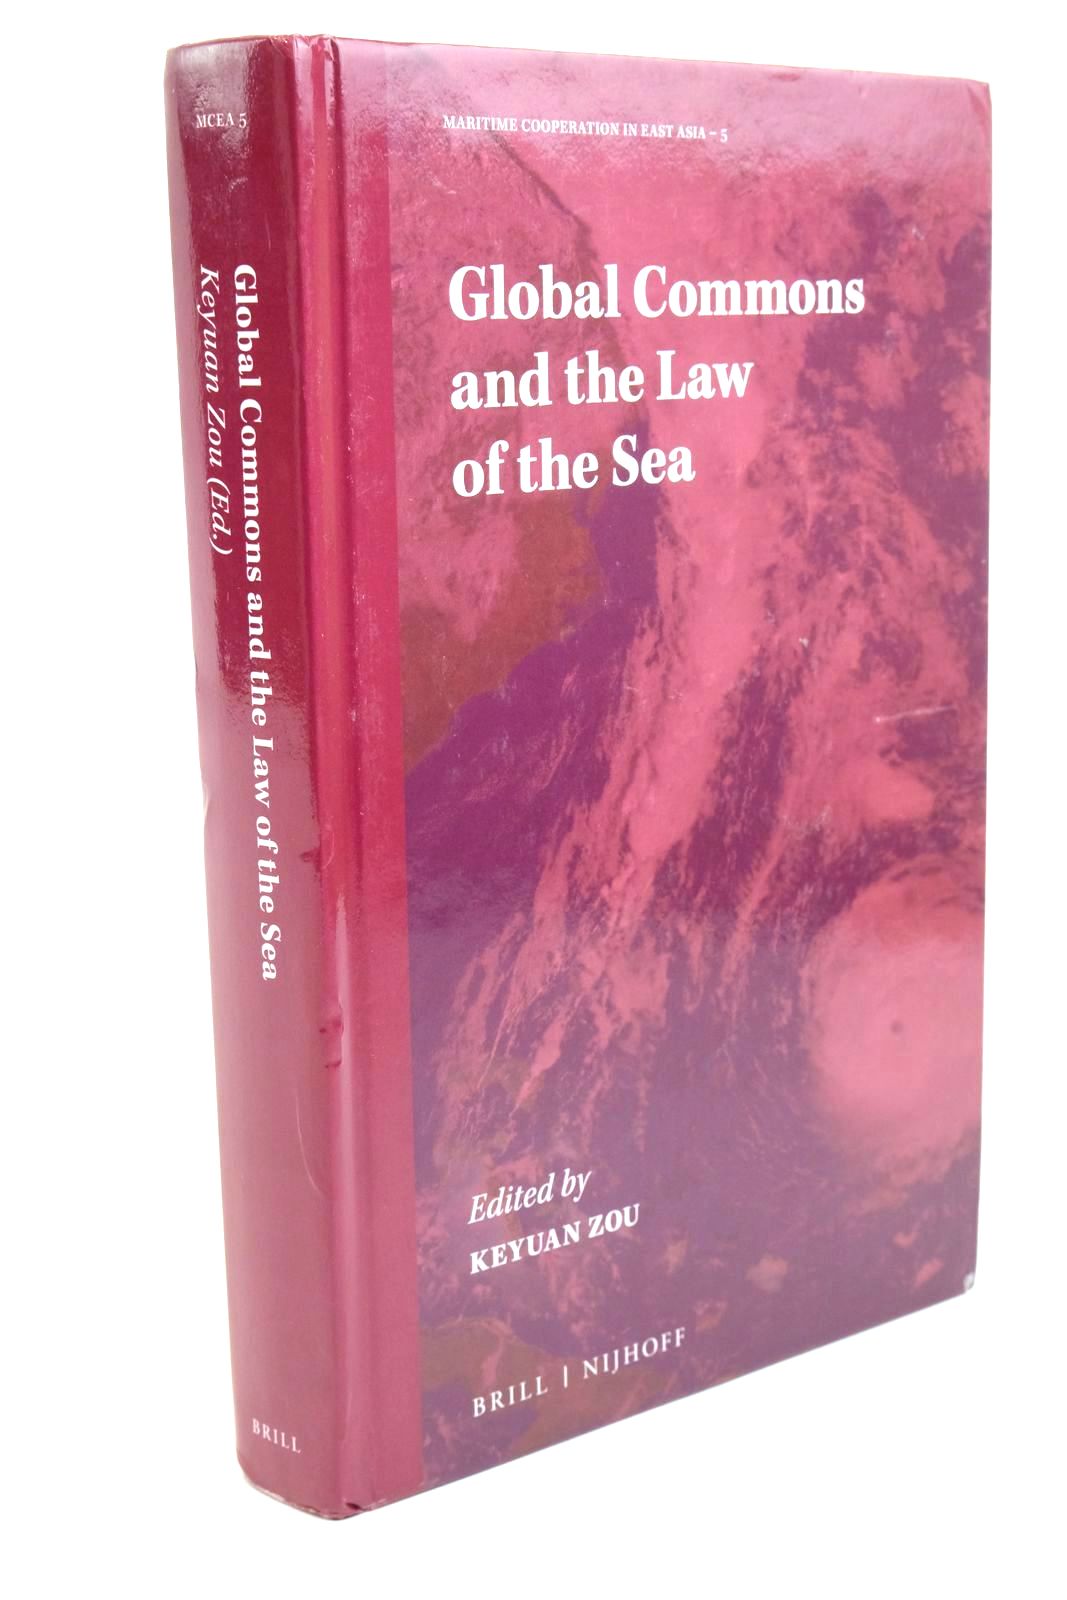 Photo of GLOBAL COMMONS AND THE LAW OF THE SEA written by Zou, Keyuan published by Brill (STOCK CODE: 1322299)  for sale by Stella & Rose's Books